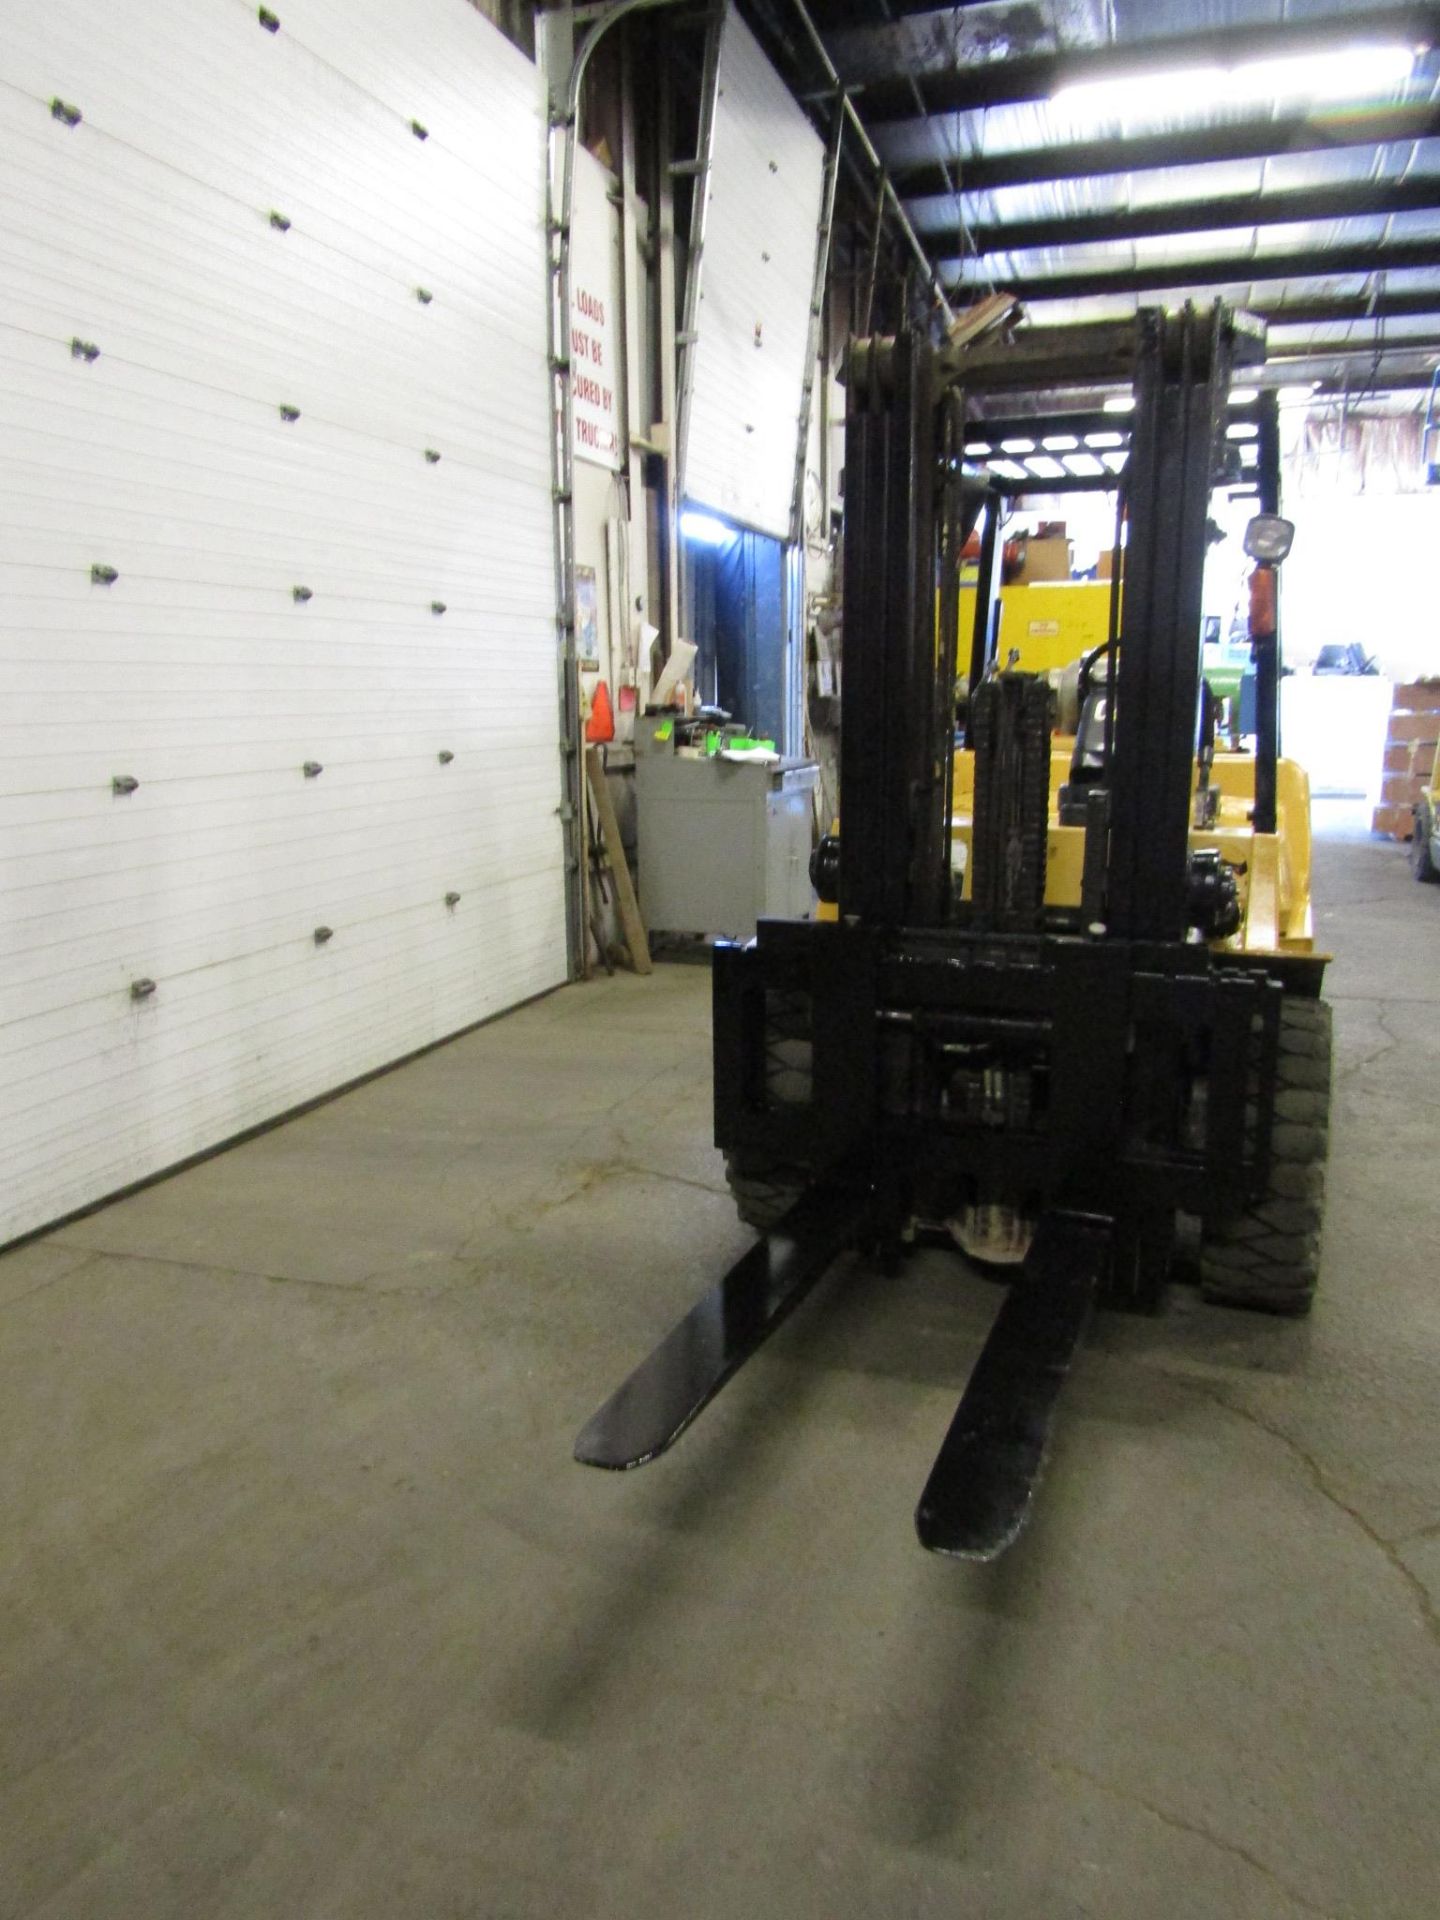 CAT 8000lbs OUTDOOR Forklift LPG (propane) with sideshift & 3-stage mast (no tank included) - Image 2 of 2